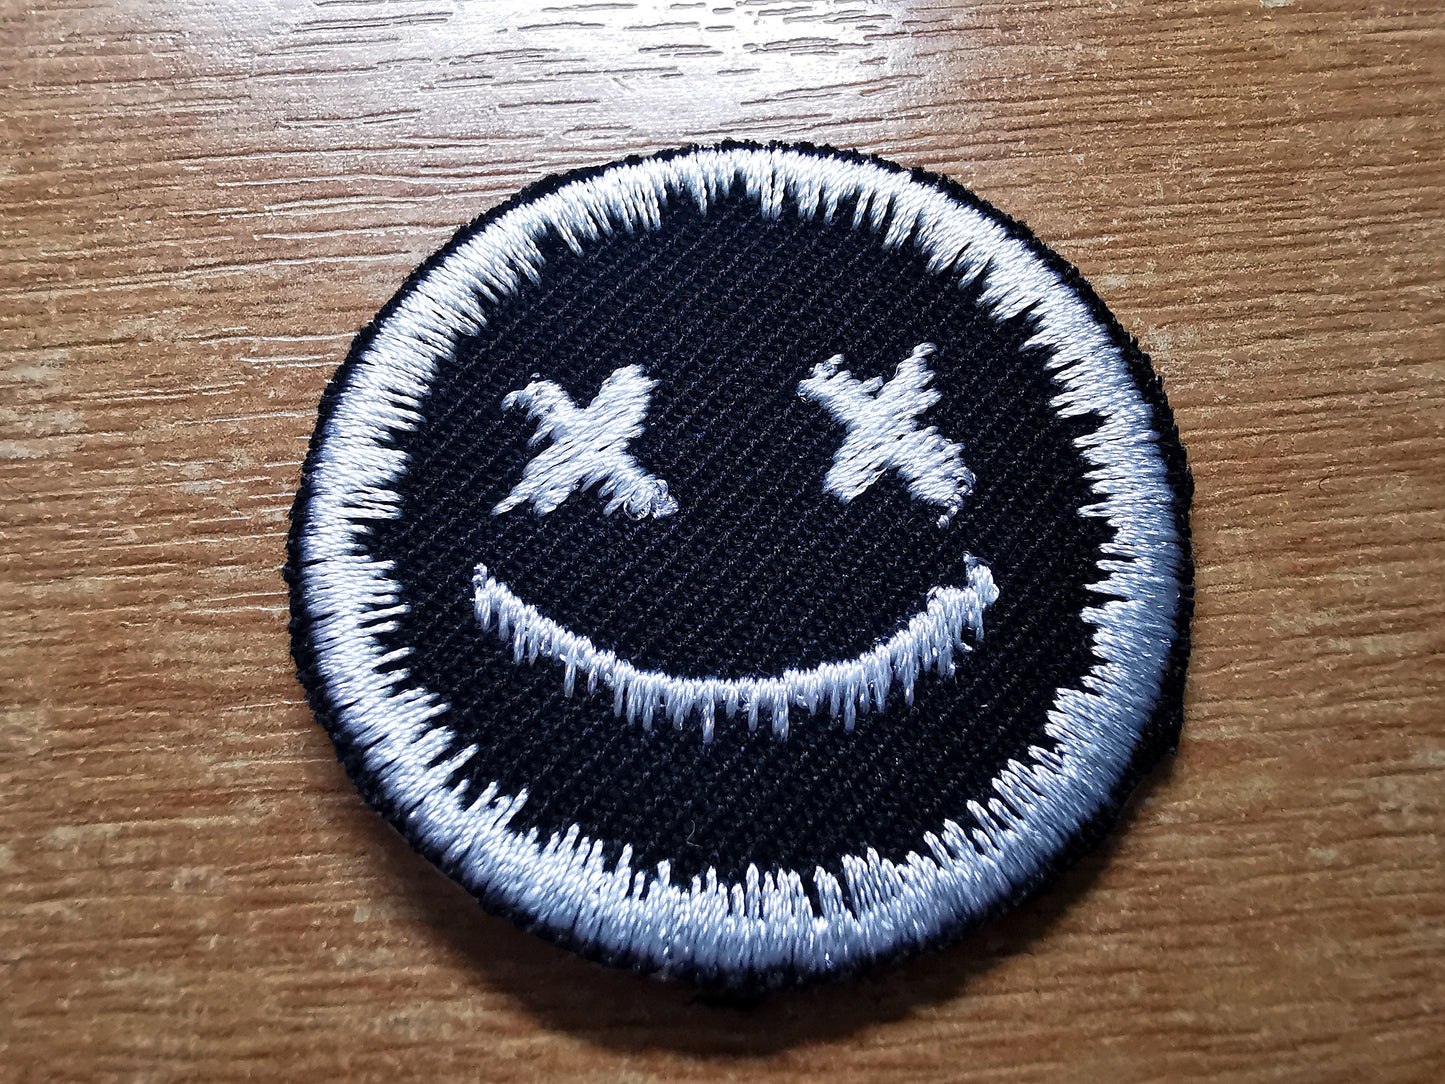 White Dripping Face Iron On Embroidered Patch Pop Punk Skater Alternative Gothic Metal Emo Gift